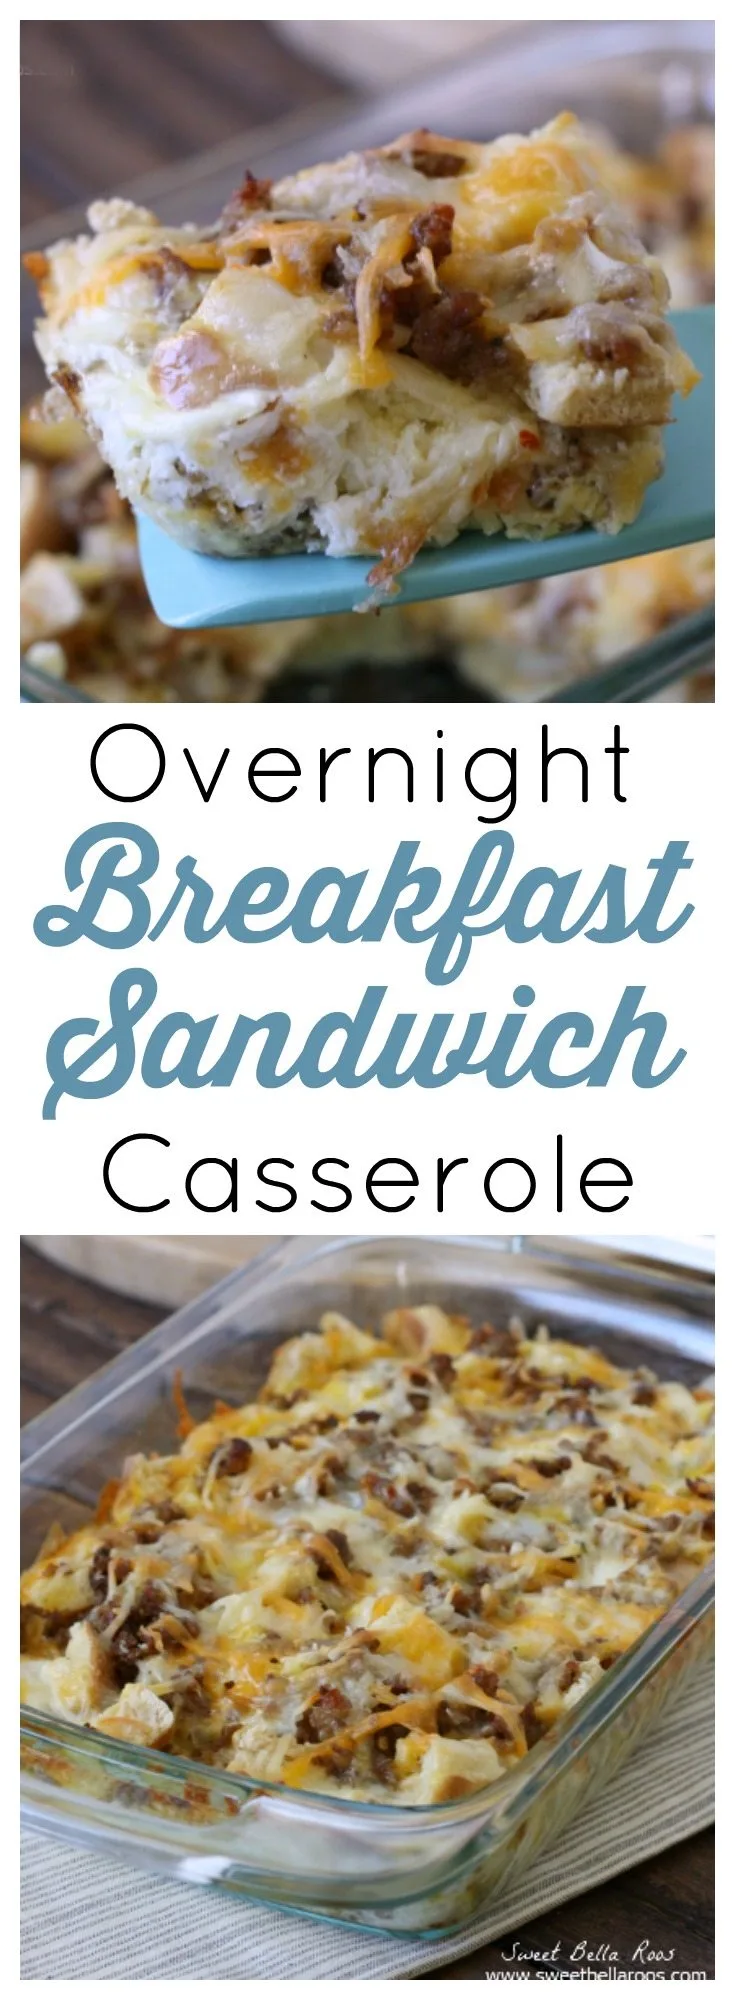 All the yummy ingredients of a sausage breakfast sandwich but even easier to make. Love to make this and top with salsa- so good! 